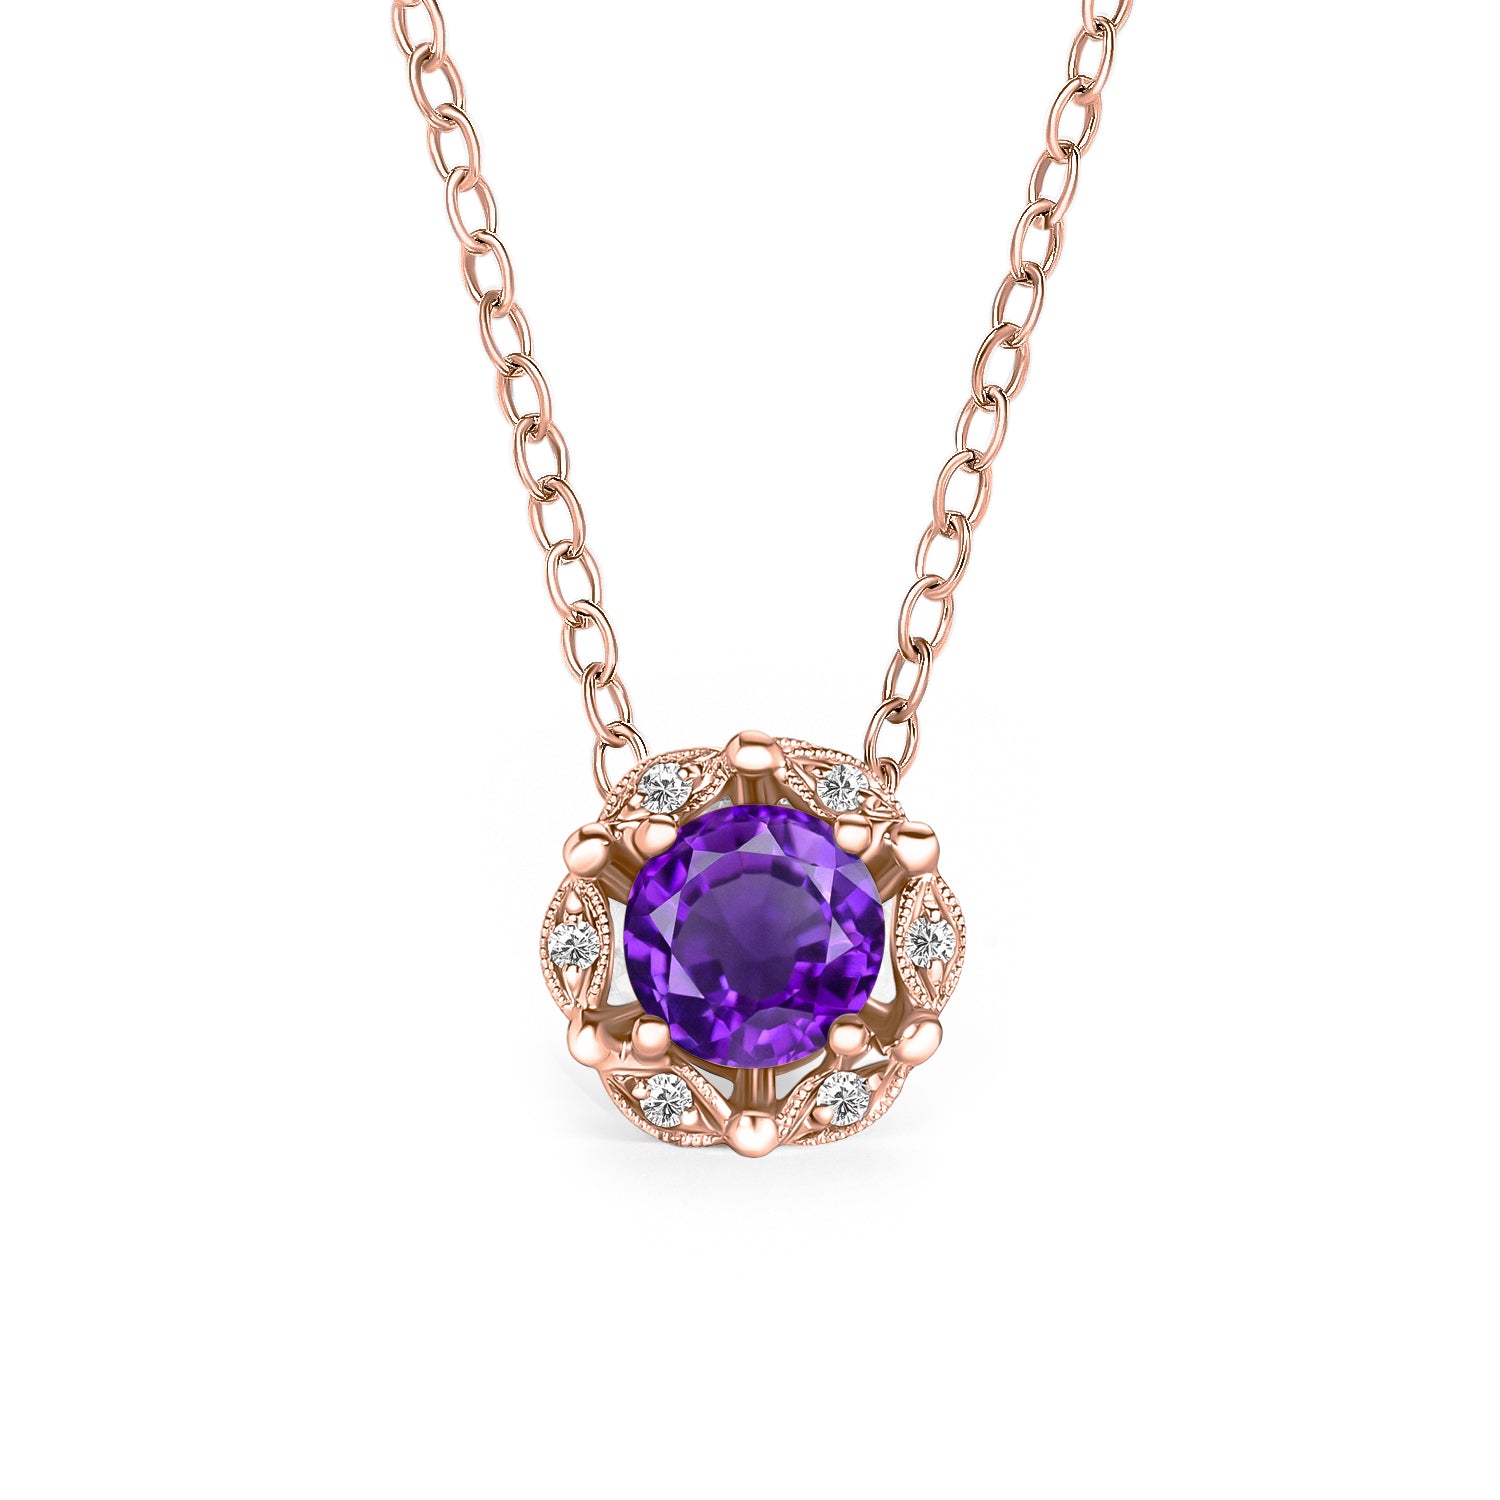 Sold at Auction: TIFFANY 18K GOLD DIAMOND STEP CUT AMETHYST NECKLACE